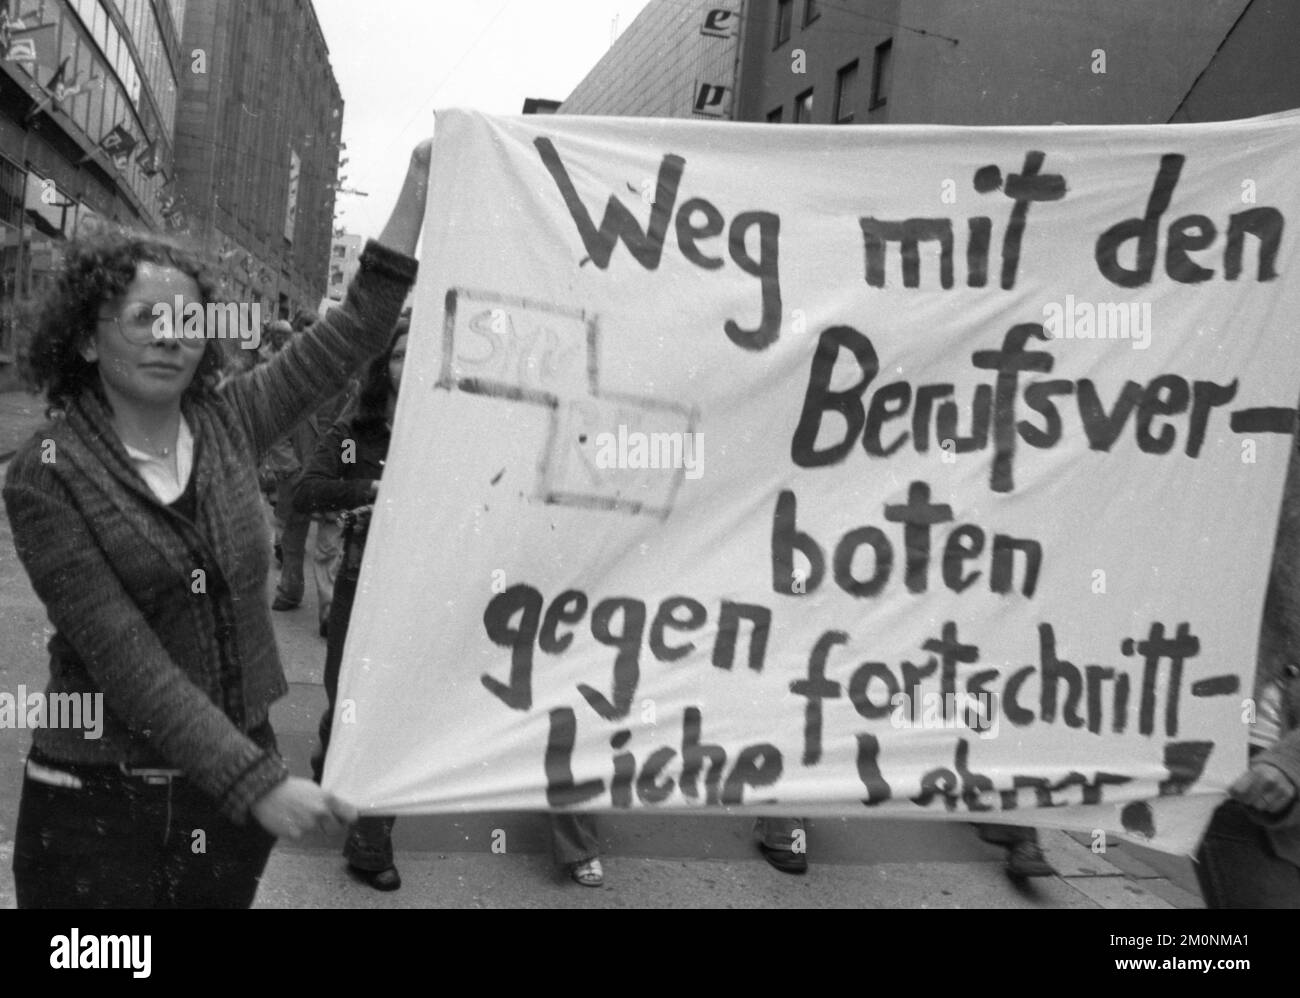 The Schuelermitverantwortung (SMV) campaigned for co-determination for students and apprentices on 1 July 1974 with a congress and subsequent demonstr Stock Photo